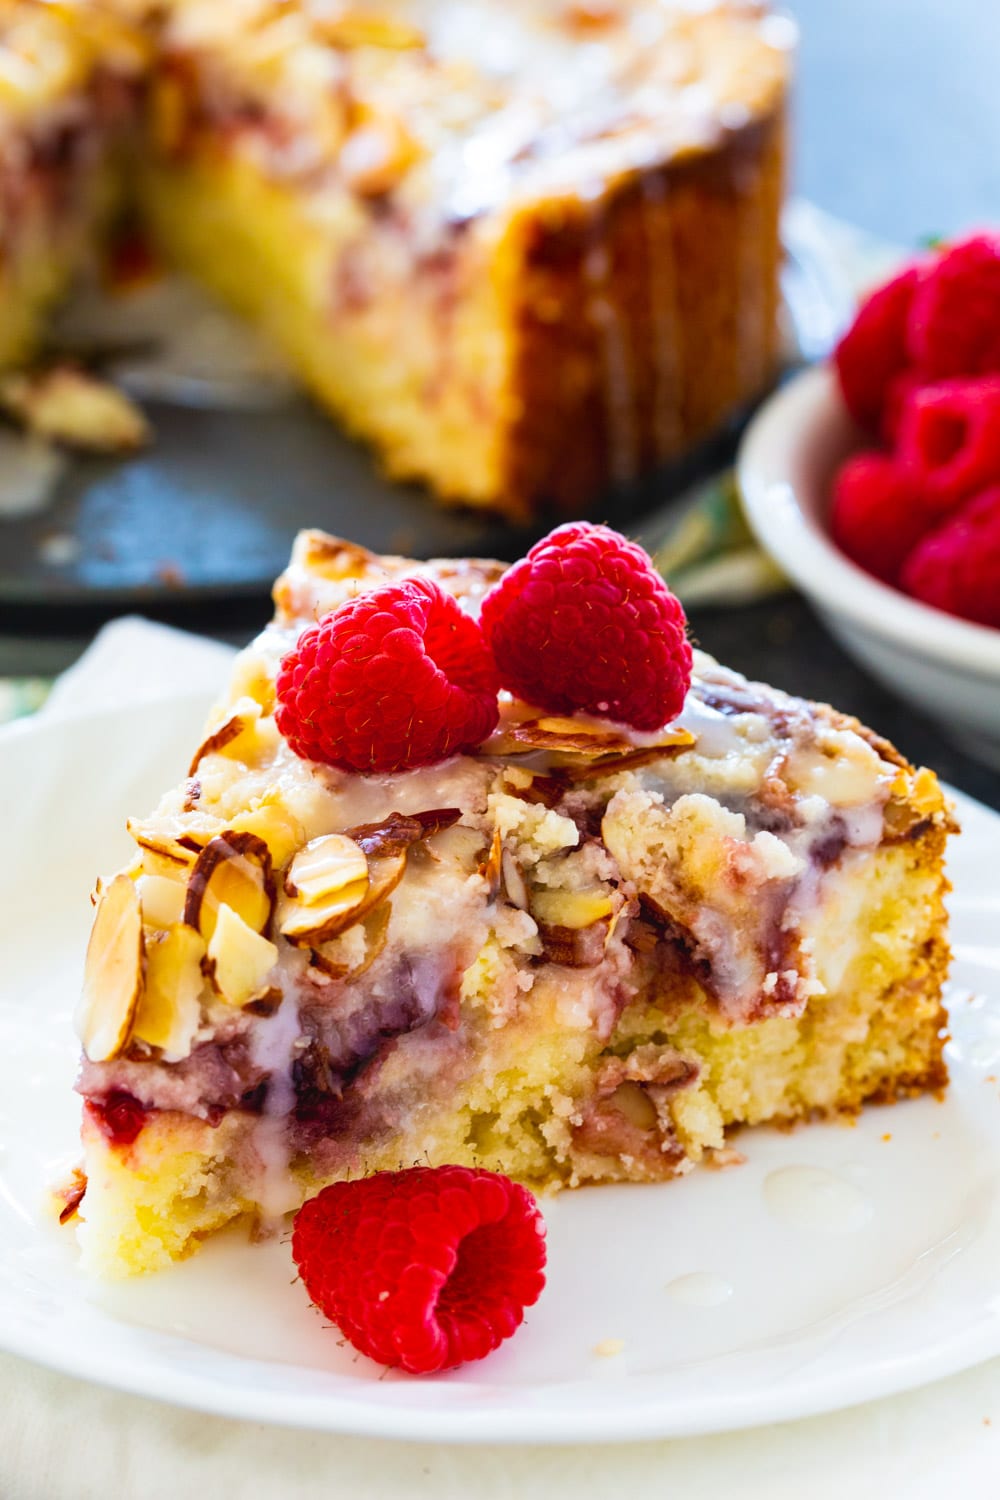 Slice of coffee cake topped with fresh raspberries.